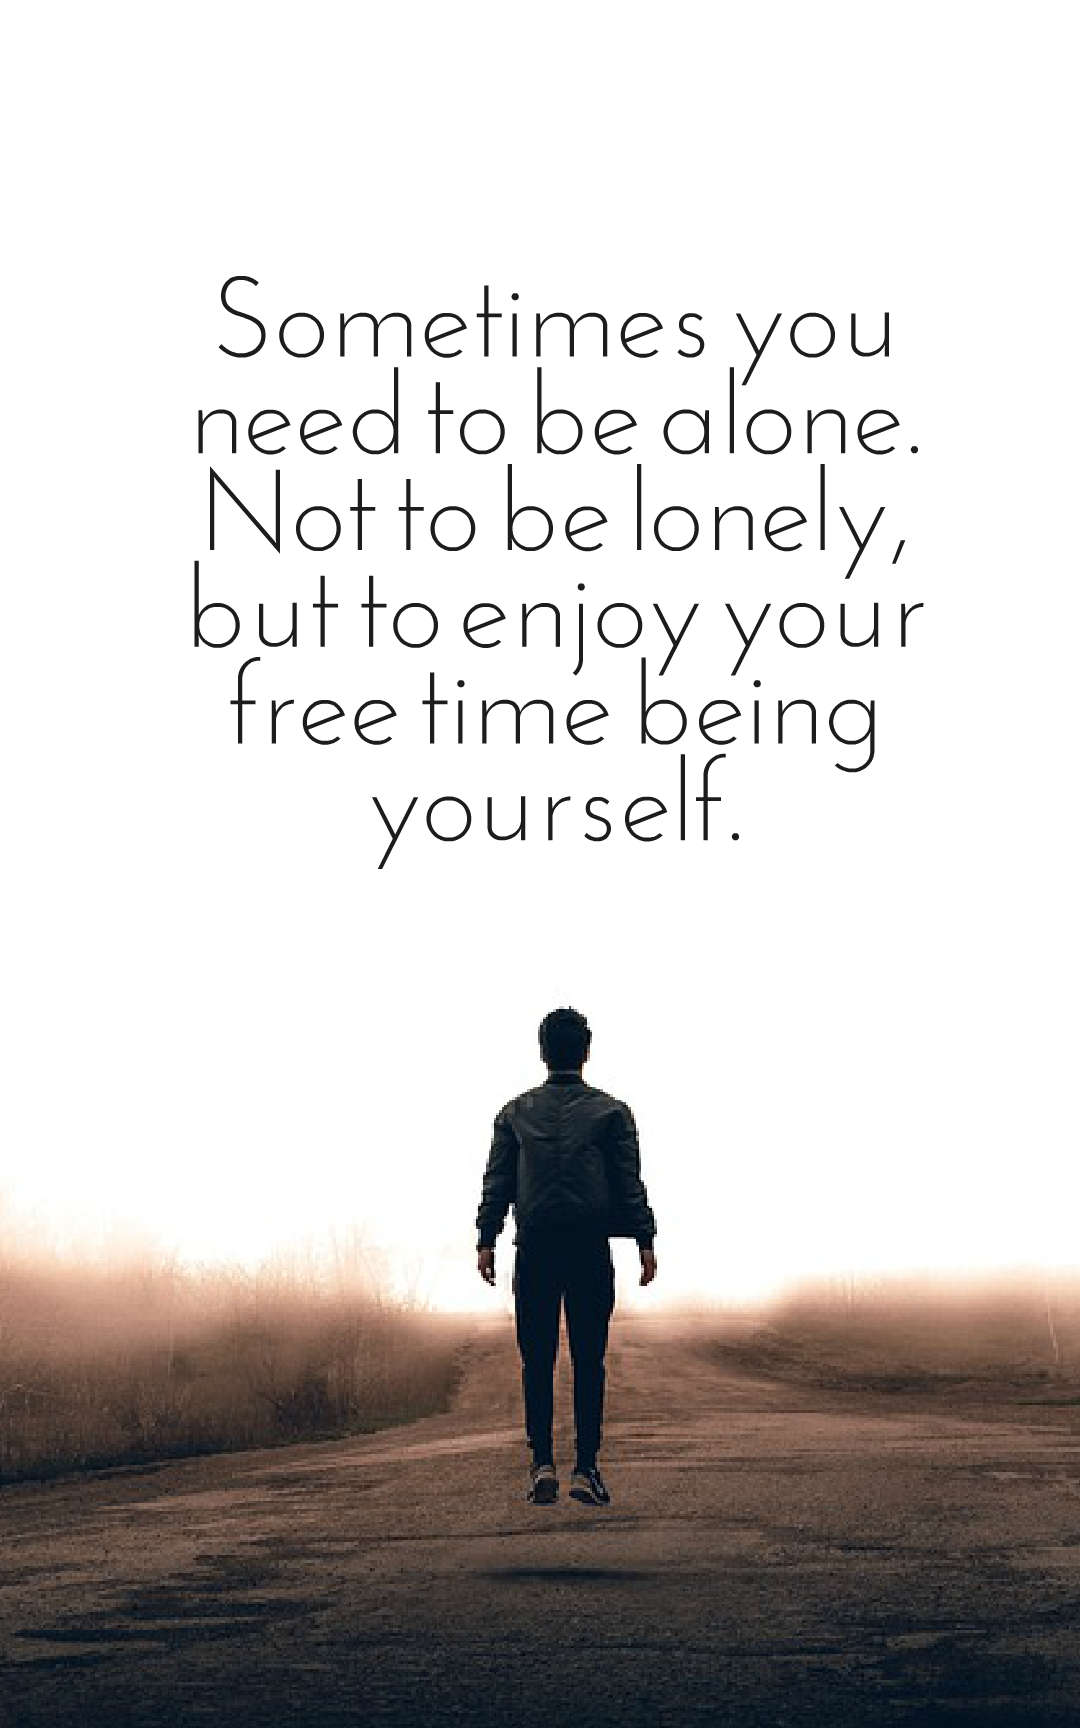 Sometimes you need to be alone. Not to be lonely but to enjoy your free time being yourself.